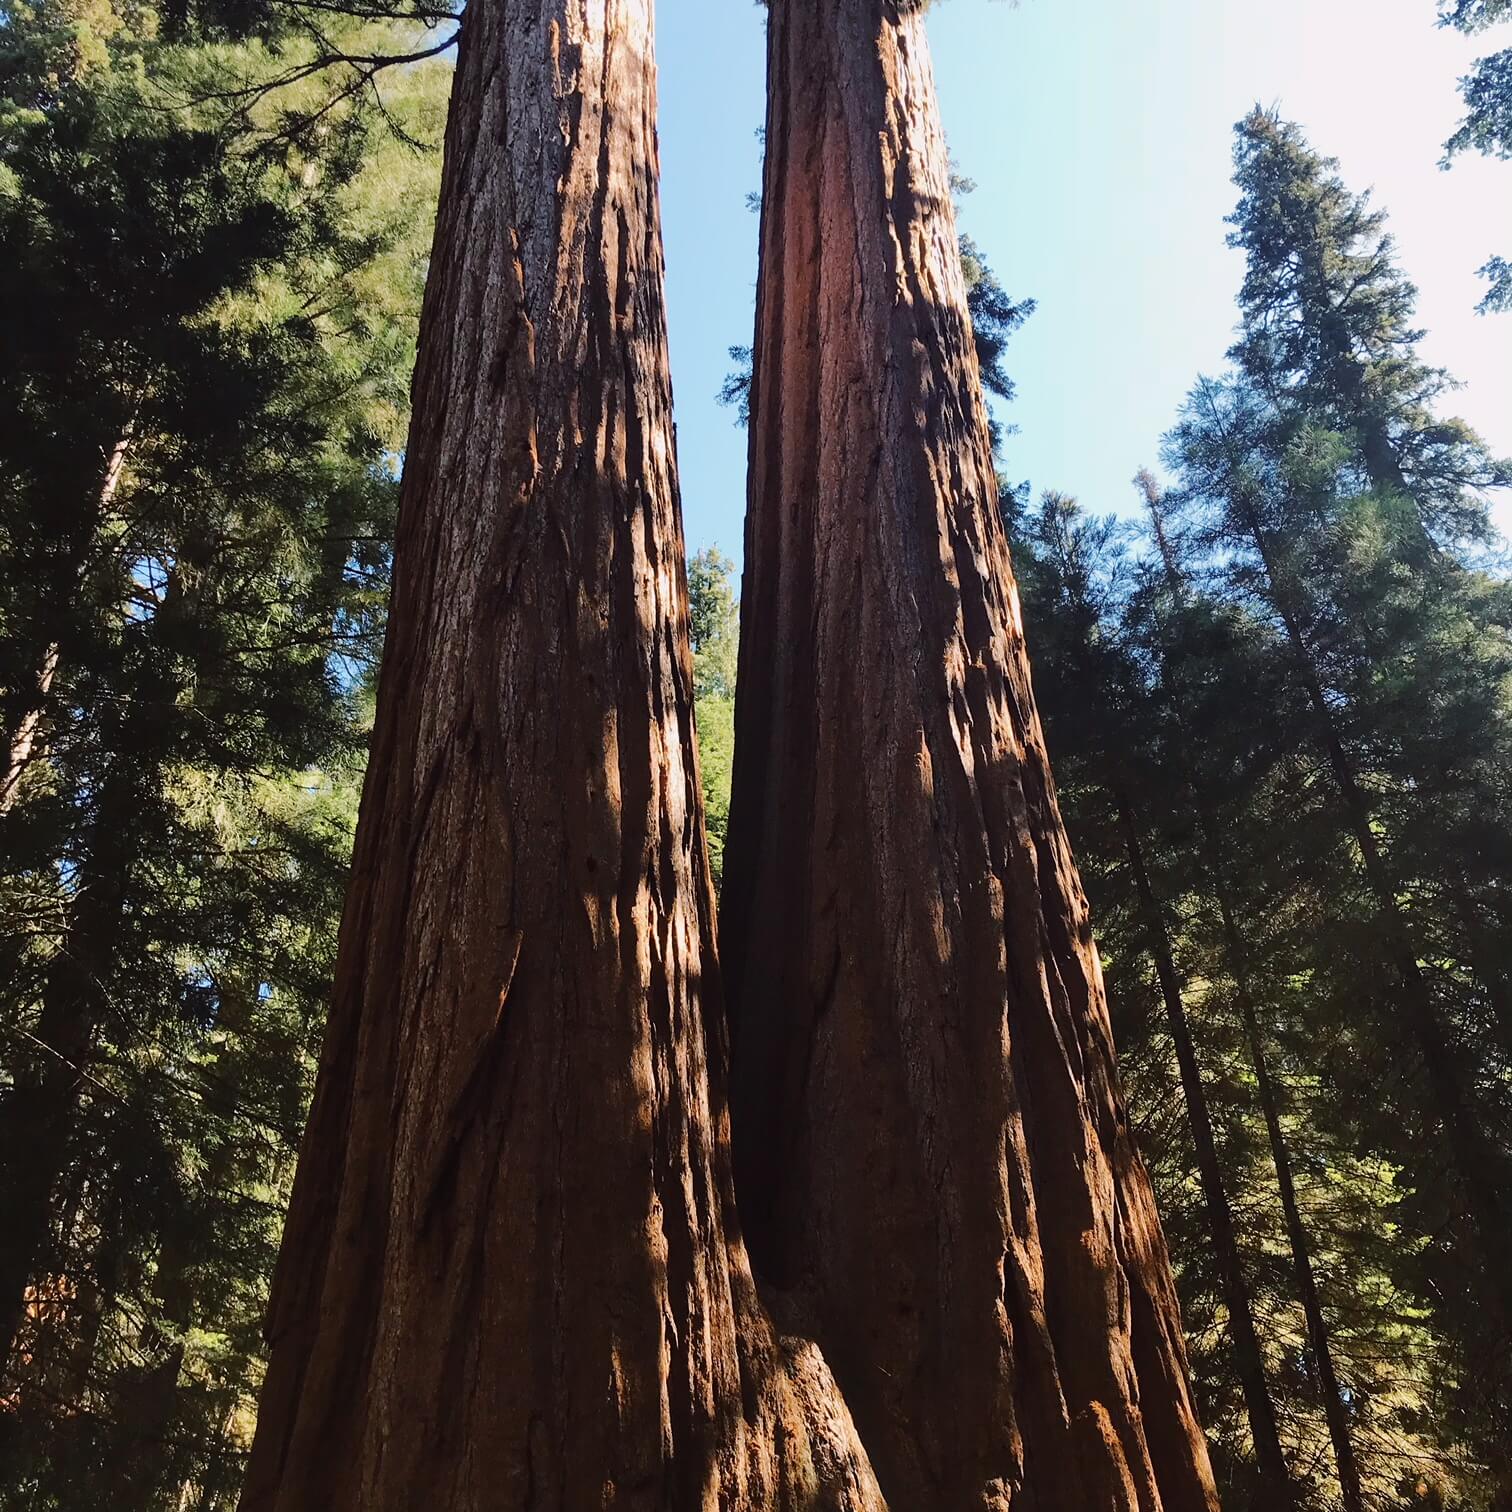 Sequoia National Park visit from Los Angeles bucket list life goals #giant sequoia national monument